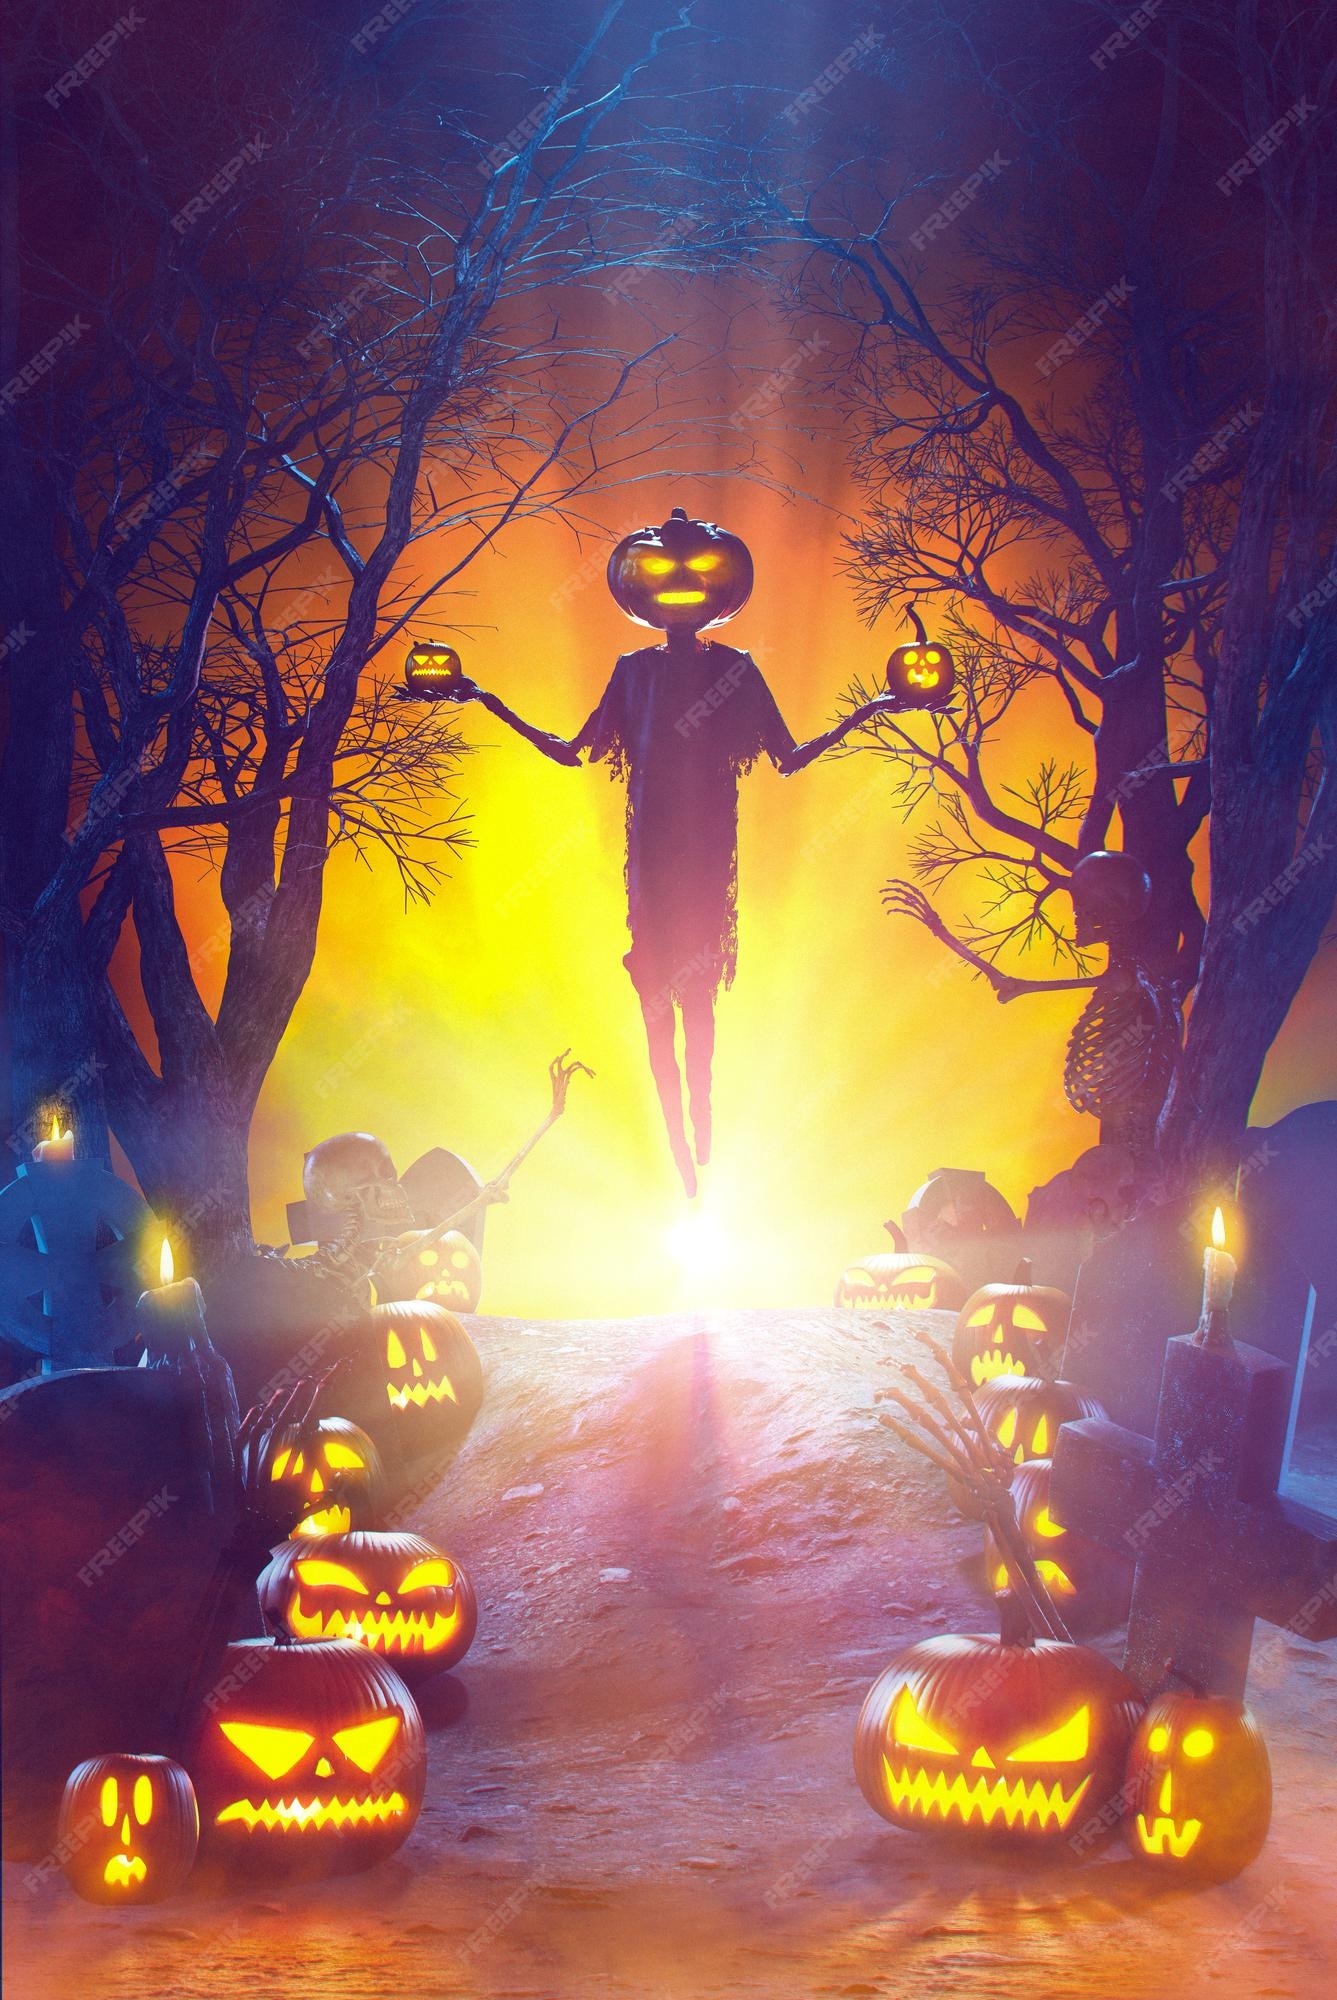 Premium Photo | Mr pumpkinhead appear from orange light on a hill in ...